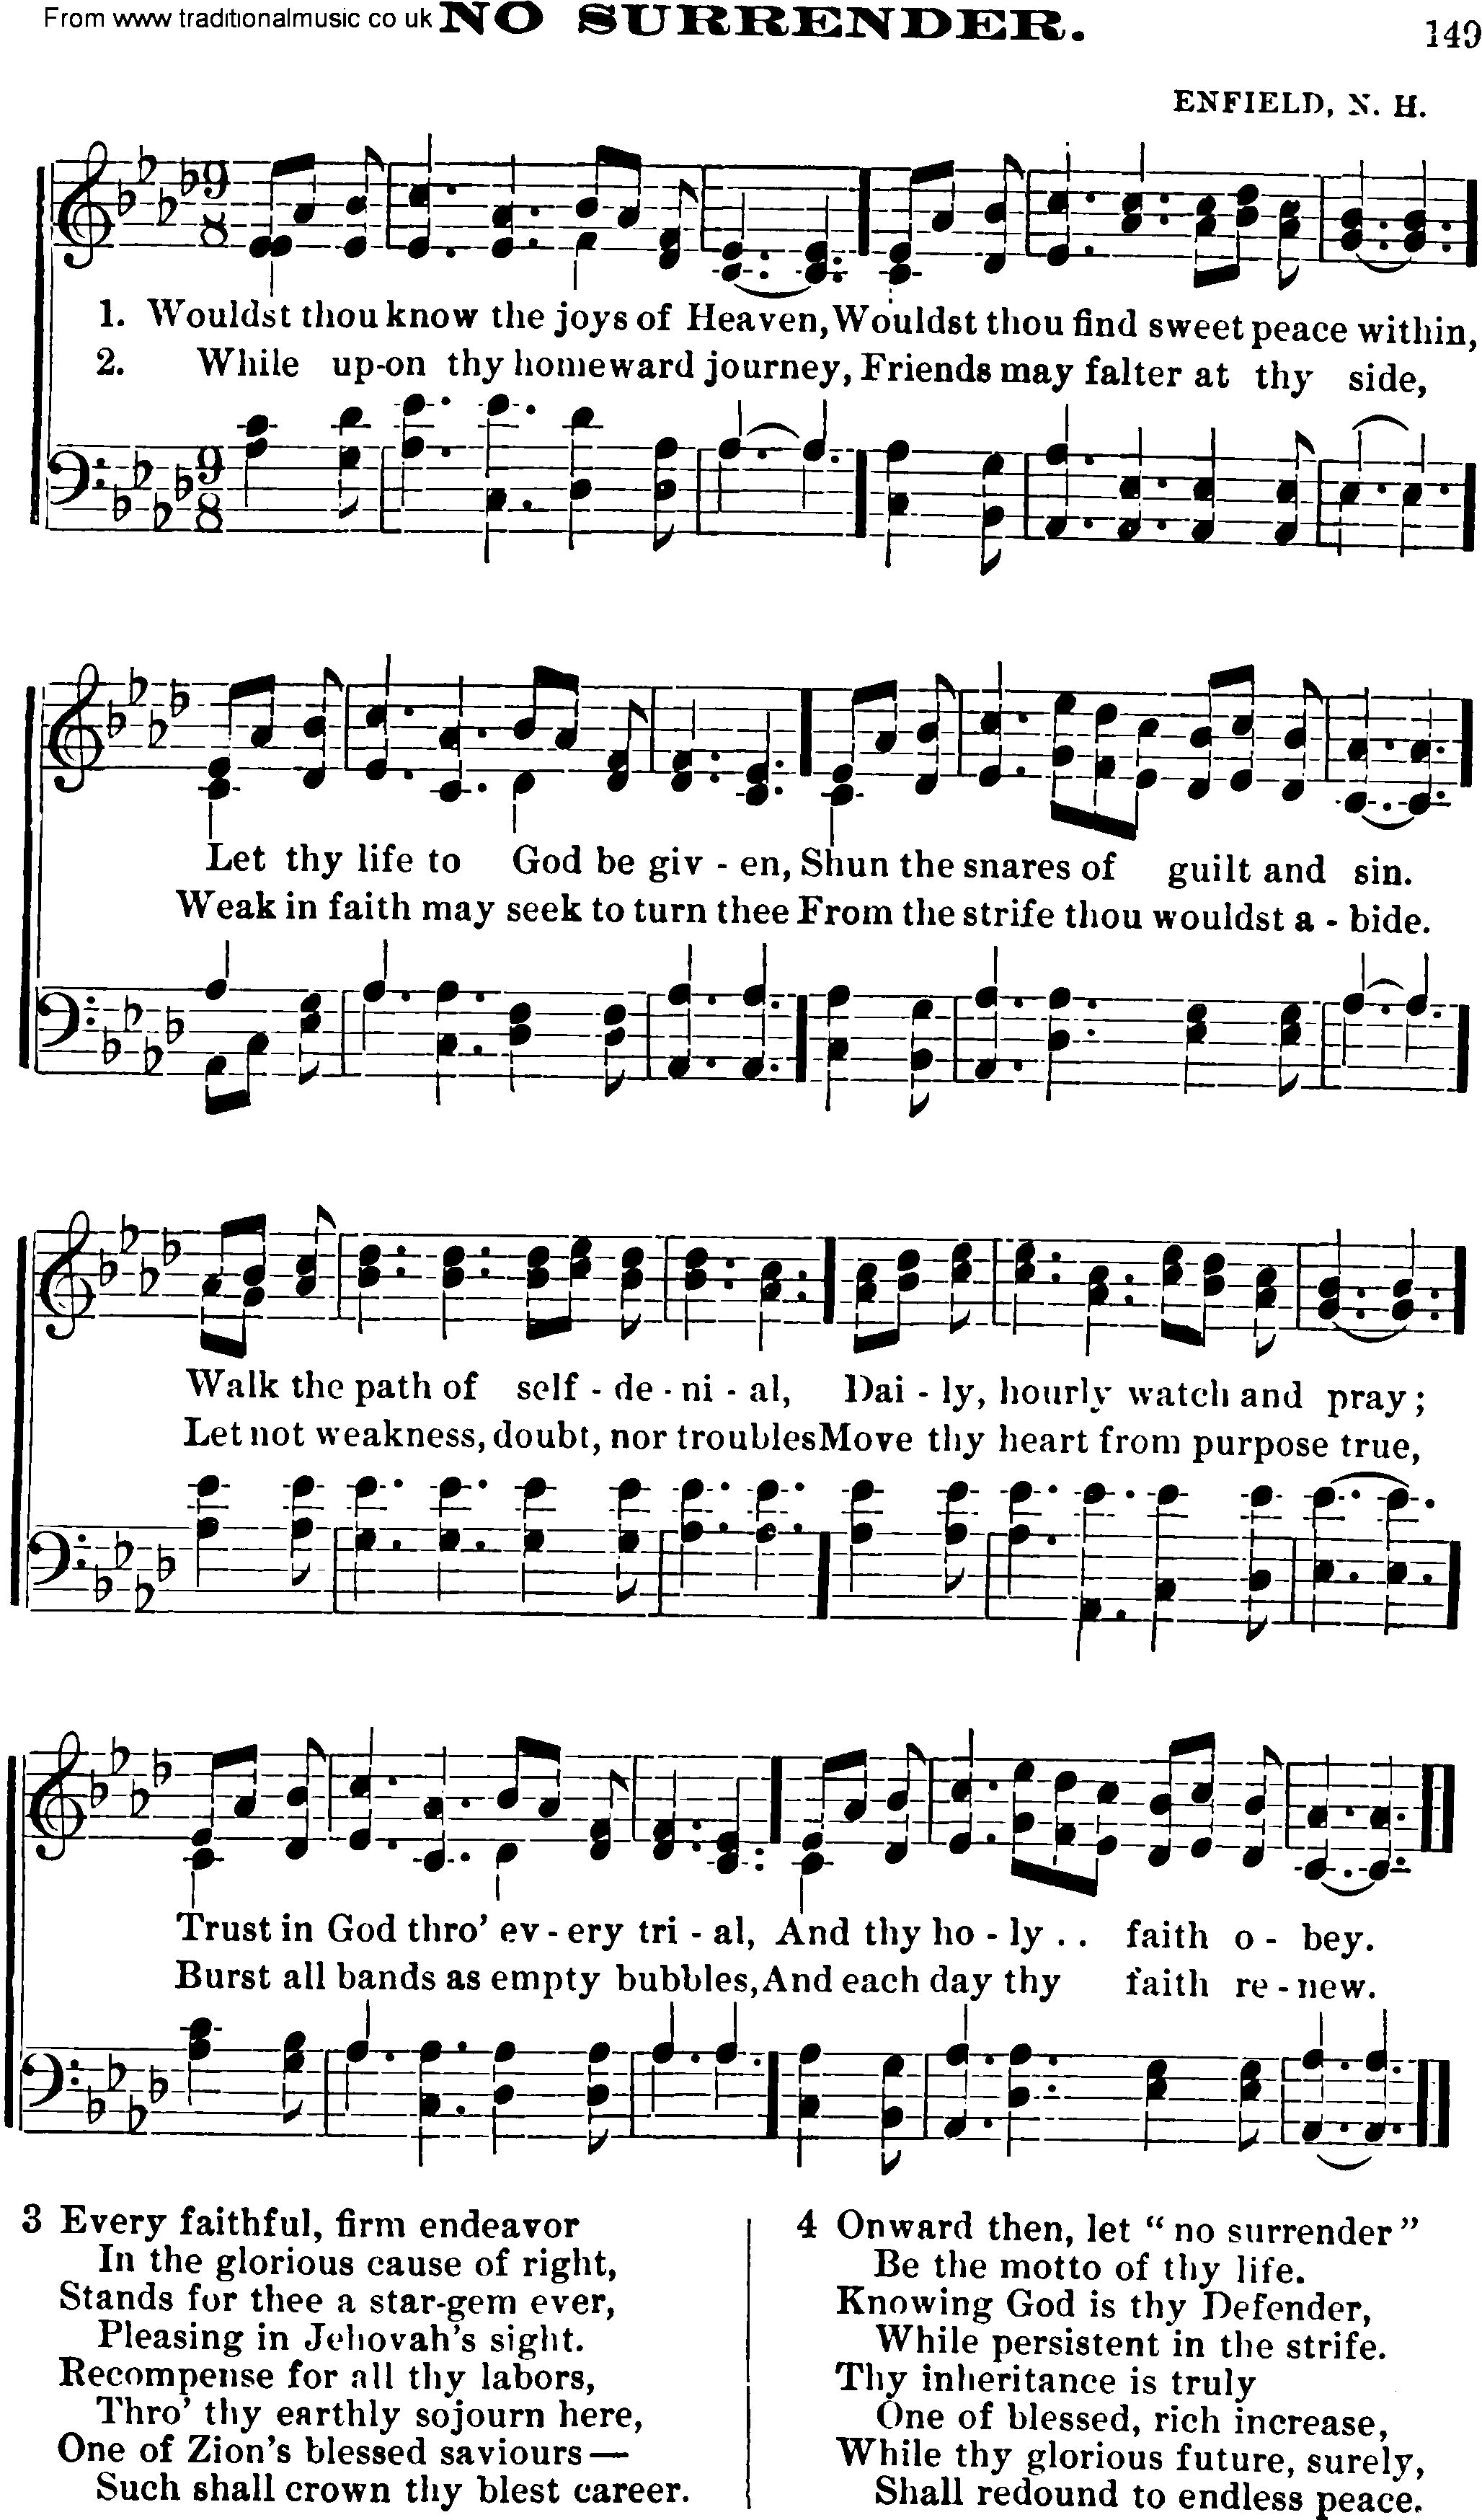 Shaker Music collection, Hymn: No Surrender, sheetmusic and PDF